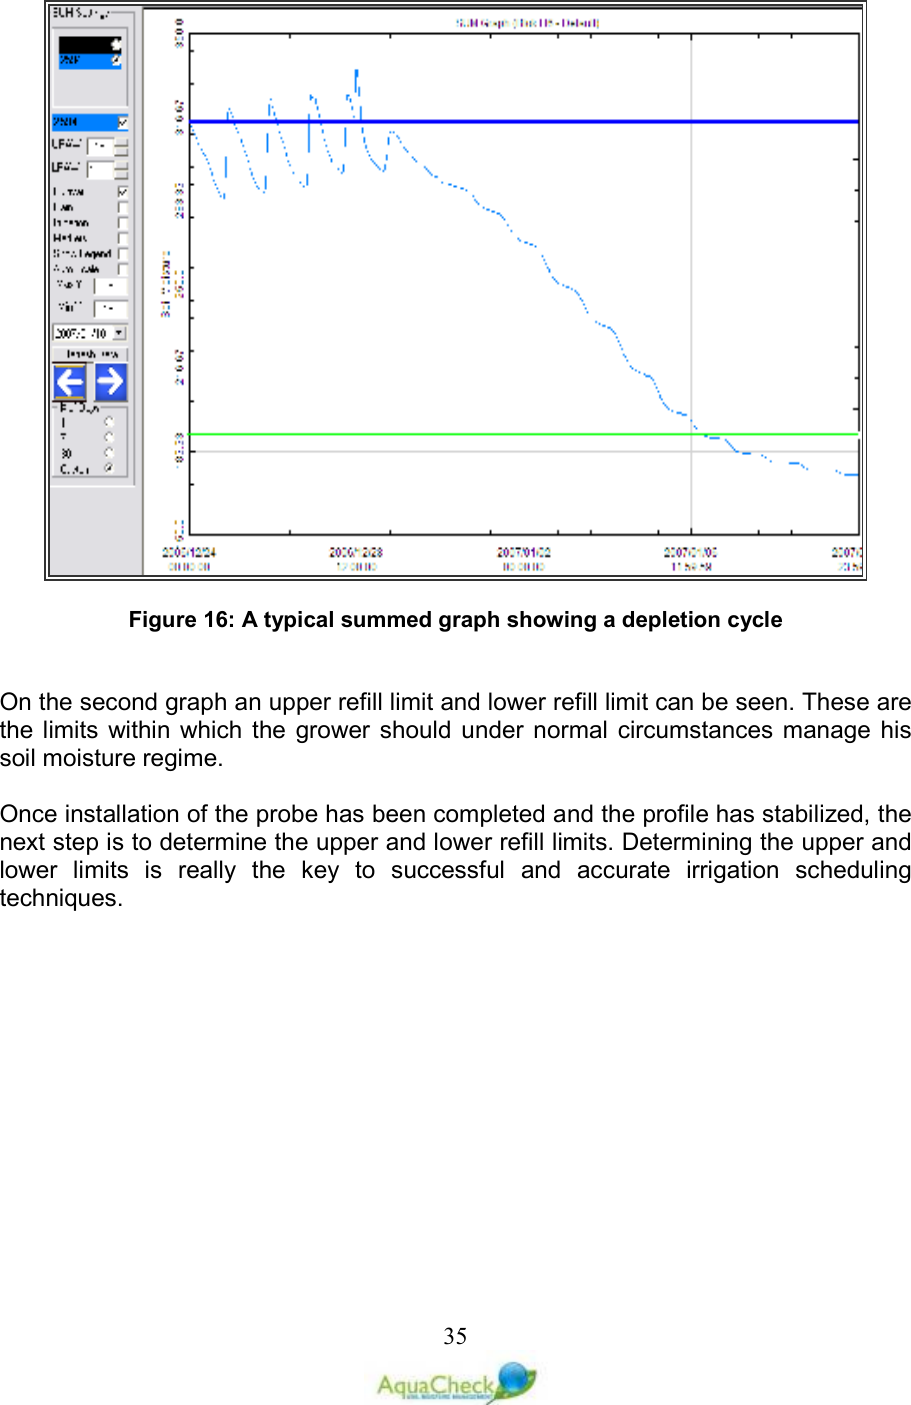   35  Figure 16: A typical summed graph showing a depletion cycle   On the second graph an upper refill limit and lower refill limit can be seen. These are the limits  within which  the  grower should  under  normal  circumstances  manage  his soil moisture regime.    Once installation of the probe has been completed and the profile has stabilized, the next step is to determine the upper and lower refill limits. Determining the upper and lower  limits  is  really  the  key  to  successful  and  accurate  irrigation  scheduling techniques. 